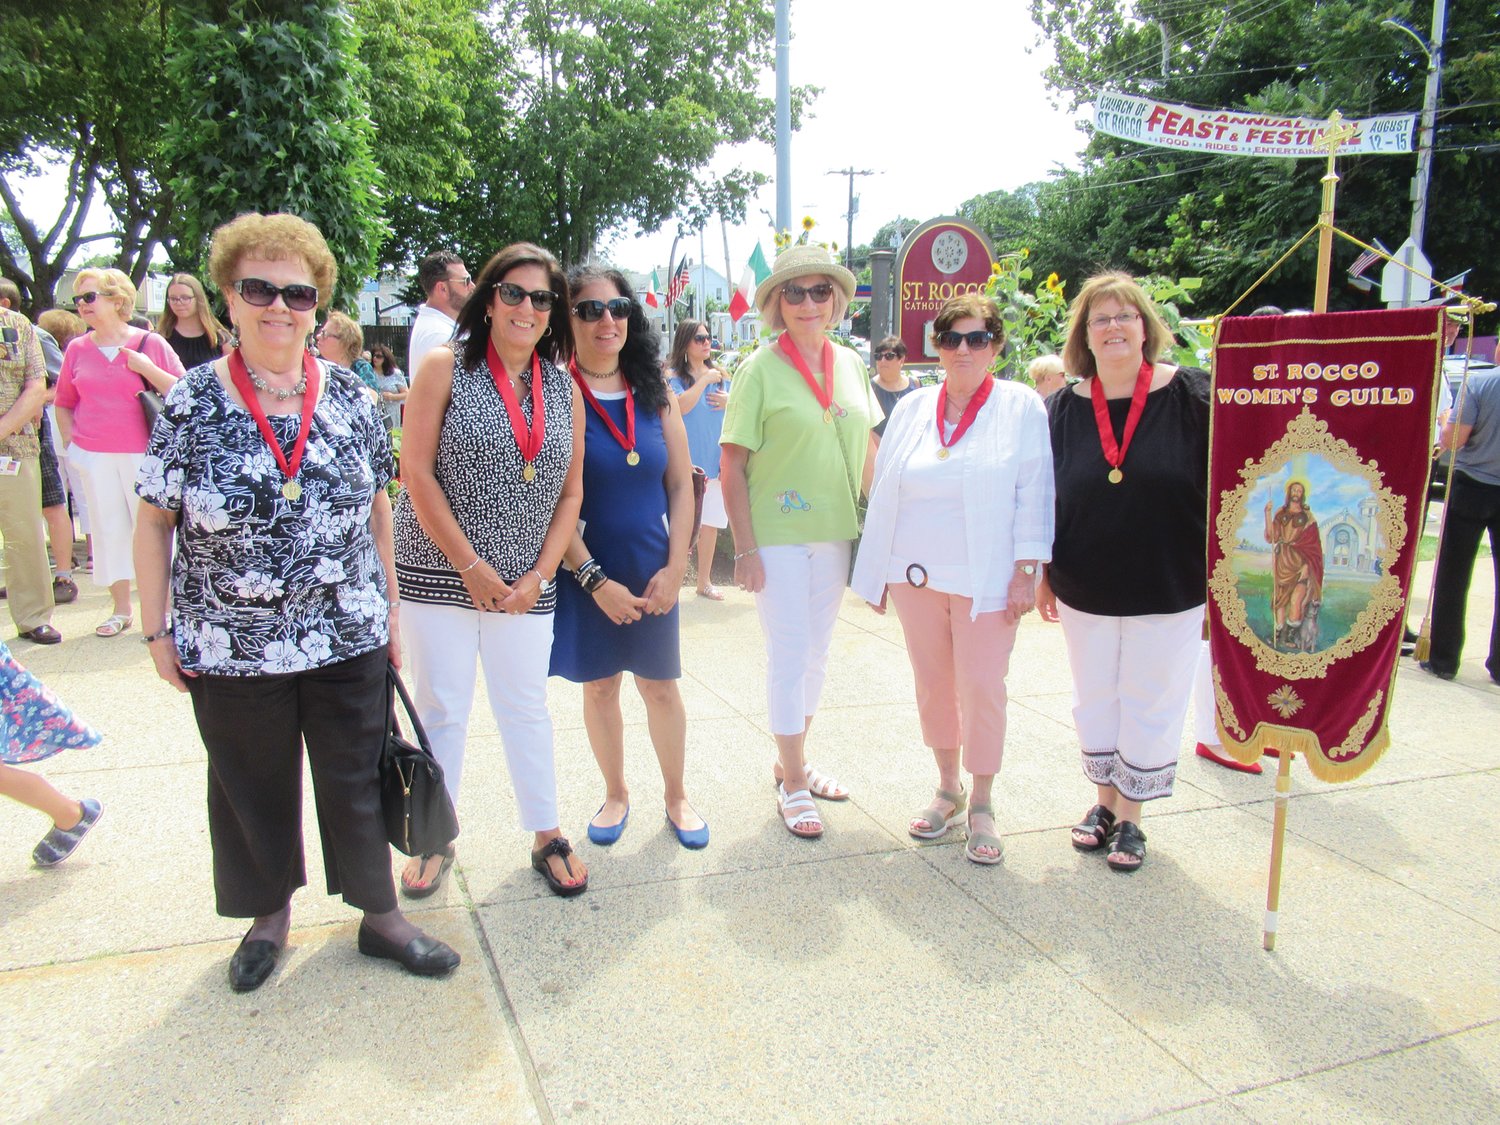 VALUABLE VOLUNTEERS: These members of the Saint Rocco’s women’s Guild worked tirelessly for four days and even marched in Sunday’s annual Feast Mass procession.